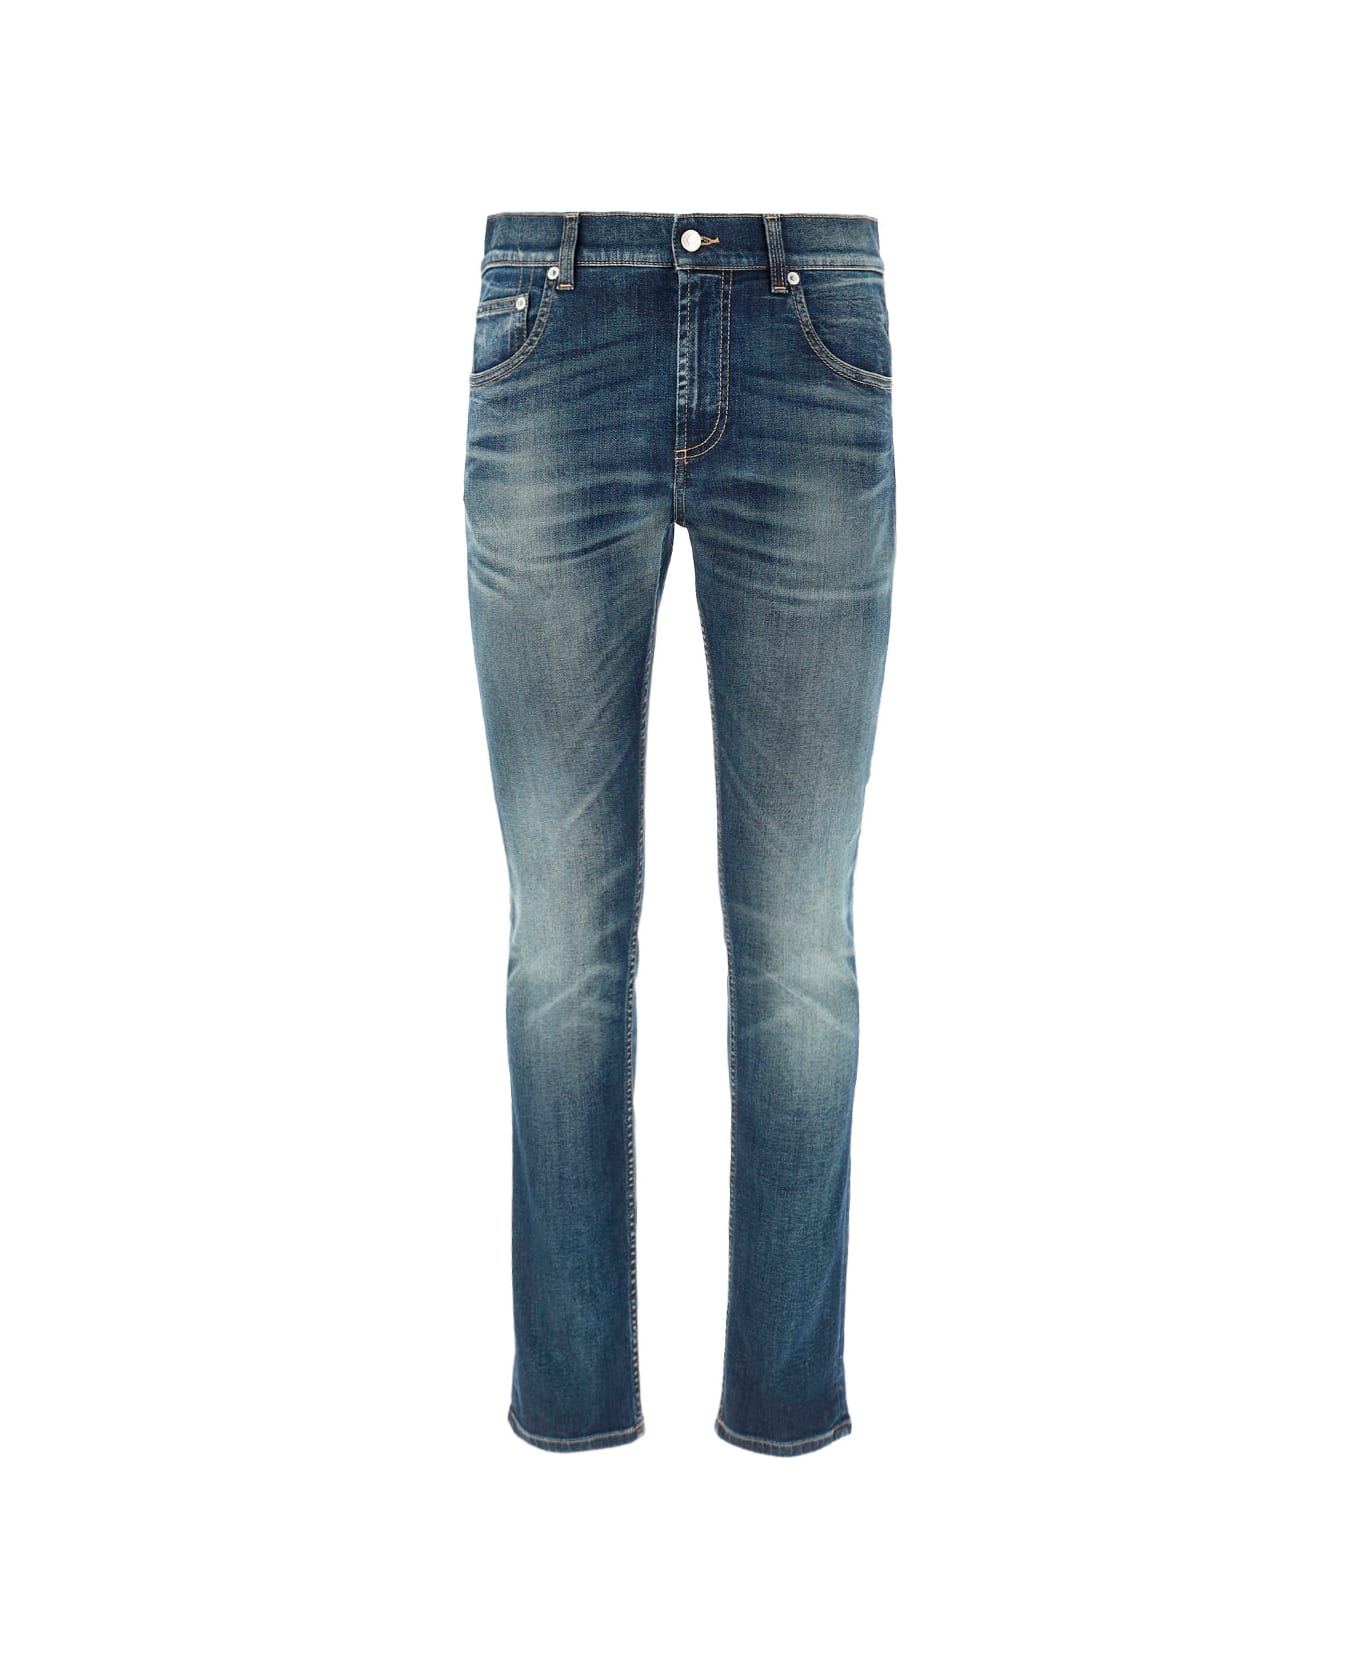 Alexander McQueen Logo Patched 5 Pockets Jeans - Blue Washed デニム